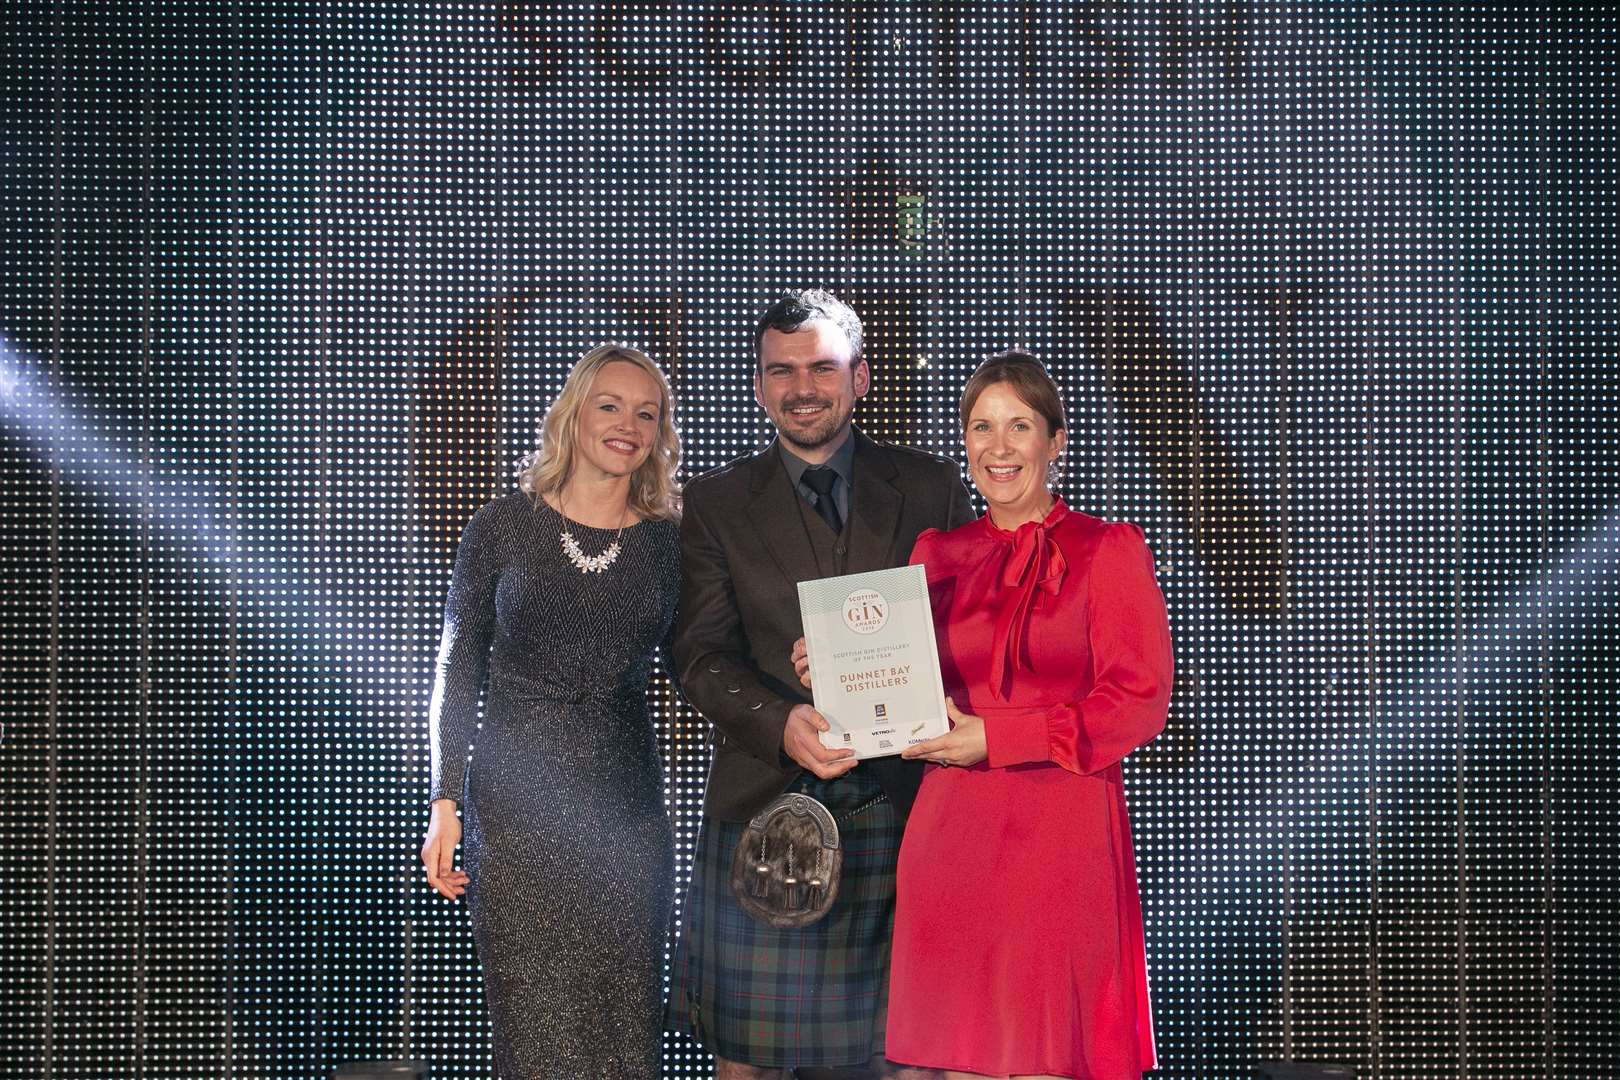 Martin and Claire Murray with the Scottish Gin Distillery of the Year award, which was presented by Christie Clinton of Aldi.